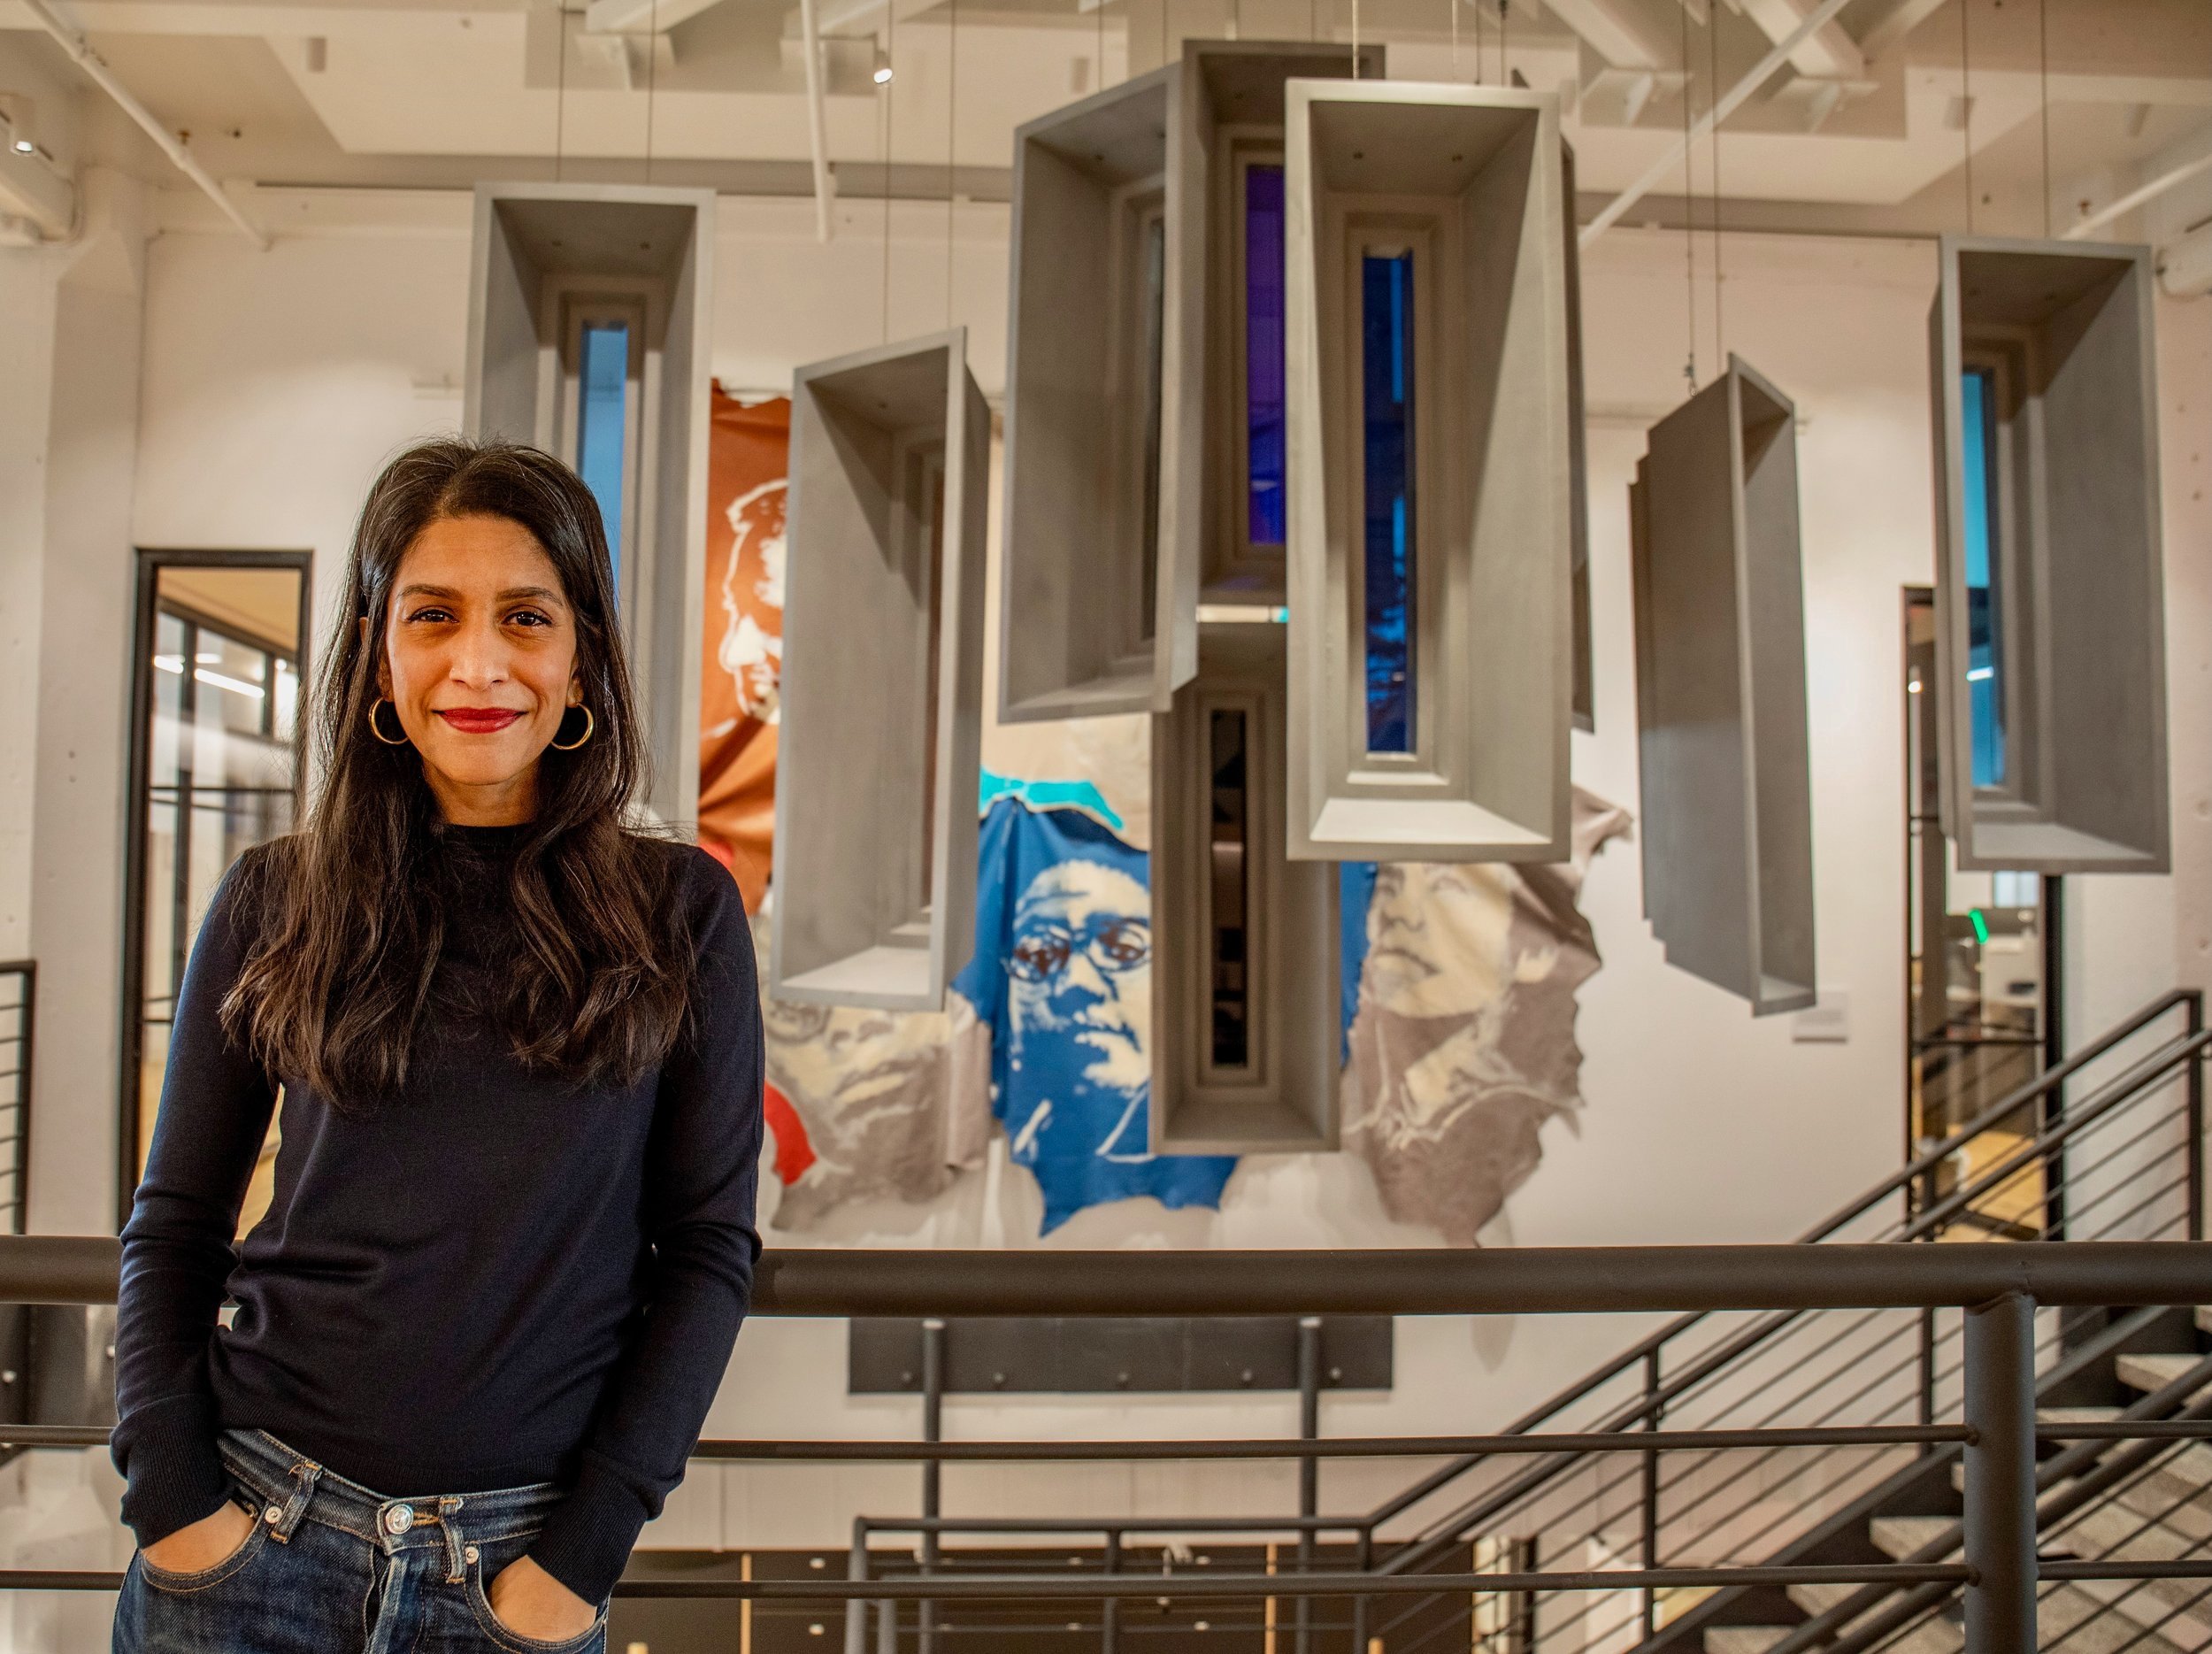  Caption: Insha Rahman, Vice President of advocacy and partnerships at the Vera Institute of Justice, stands for a portrait at the Vera offices in Brooklyn. In the backdrop are windows made by an artist meant to replicate windows used in jails.  “Im 